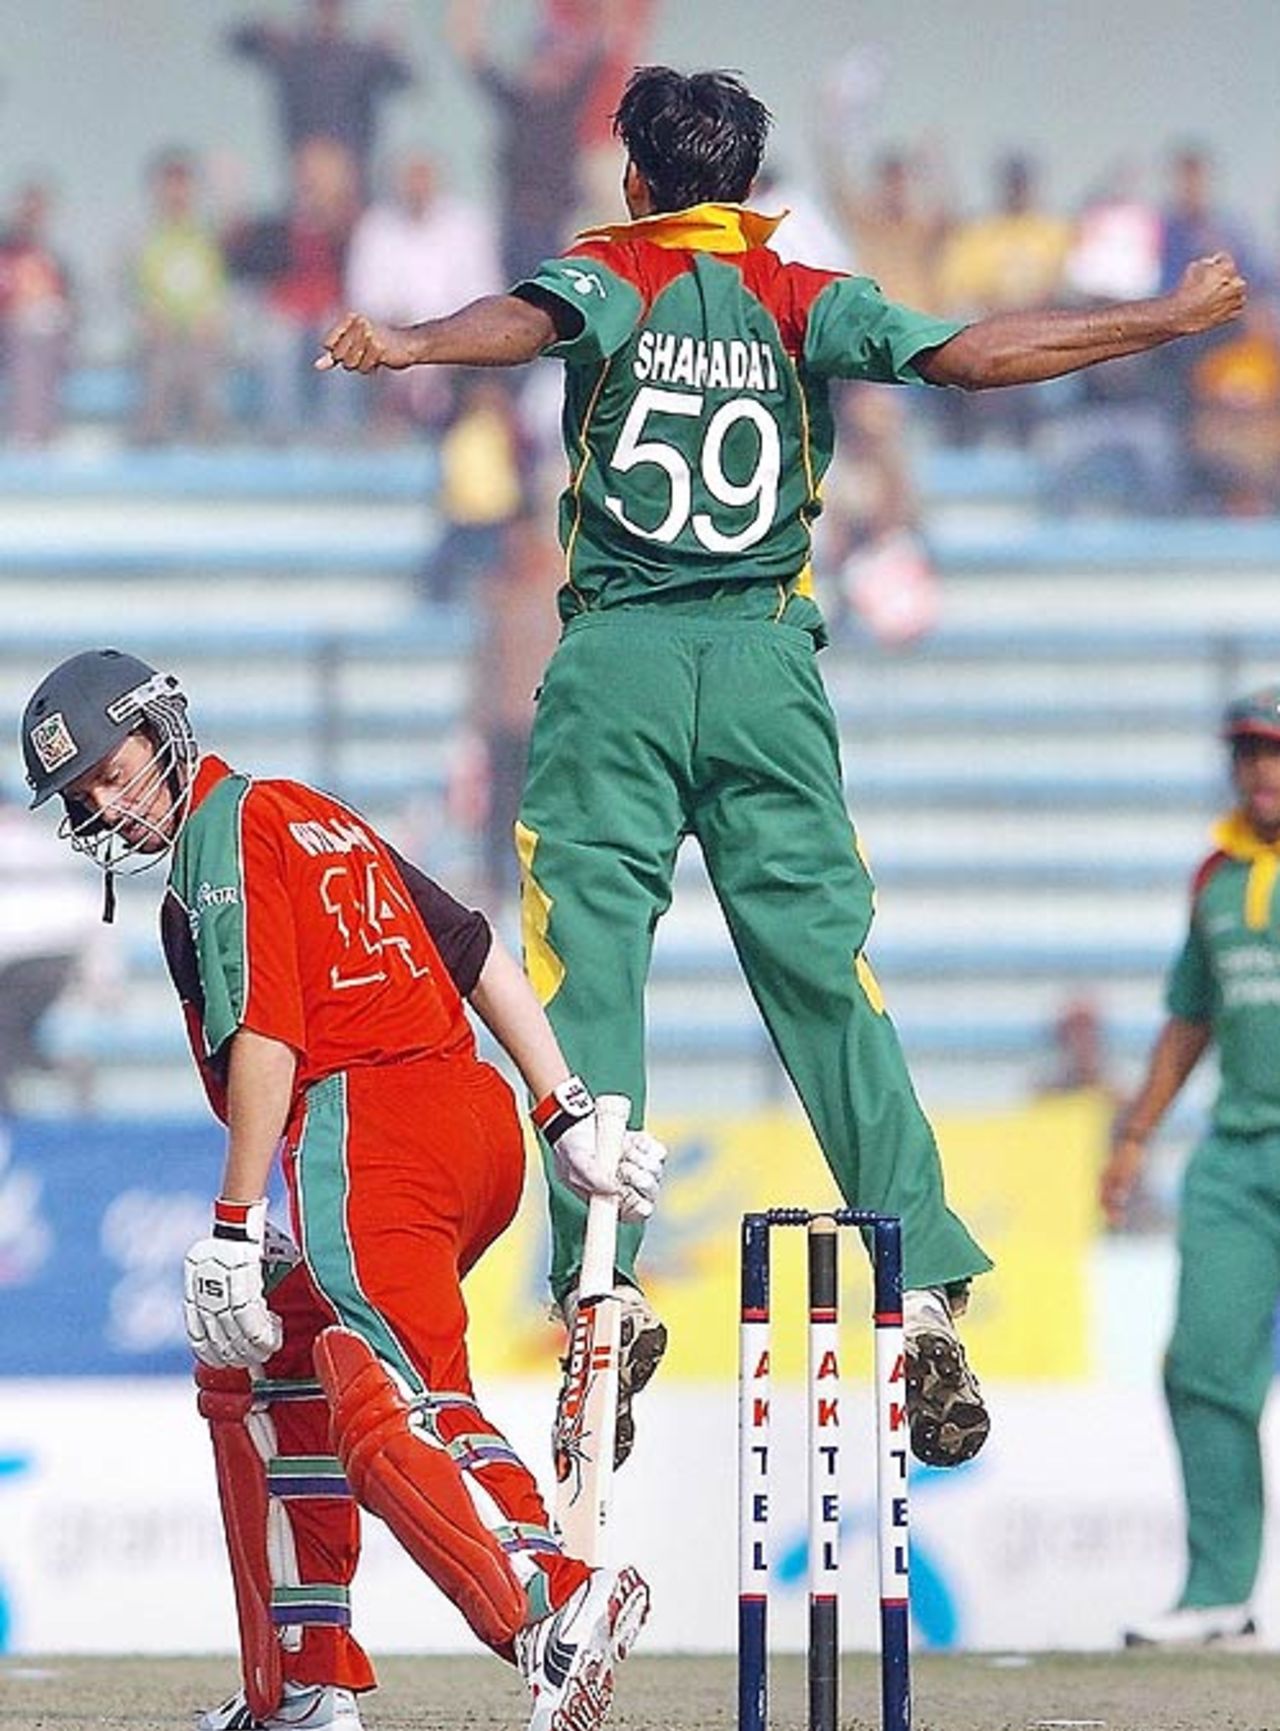 Shahadat Hossain leaps with delight after getting Sean Williams first ball, Bangladesh v Zimbabwe, 4th ODI, Dhaka, December 8, 2006